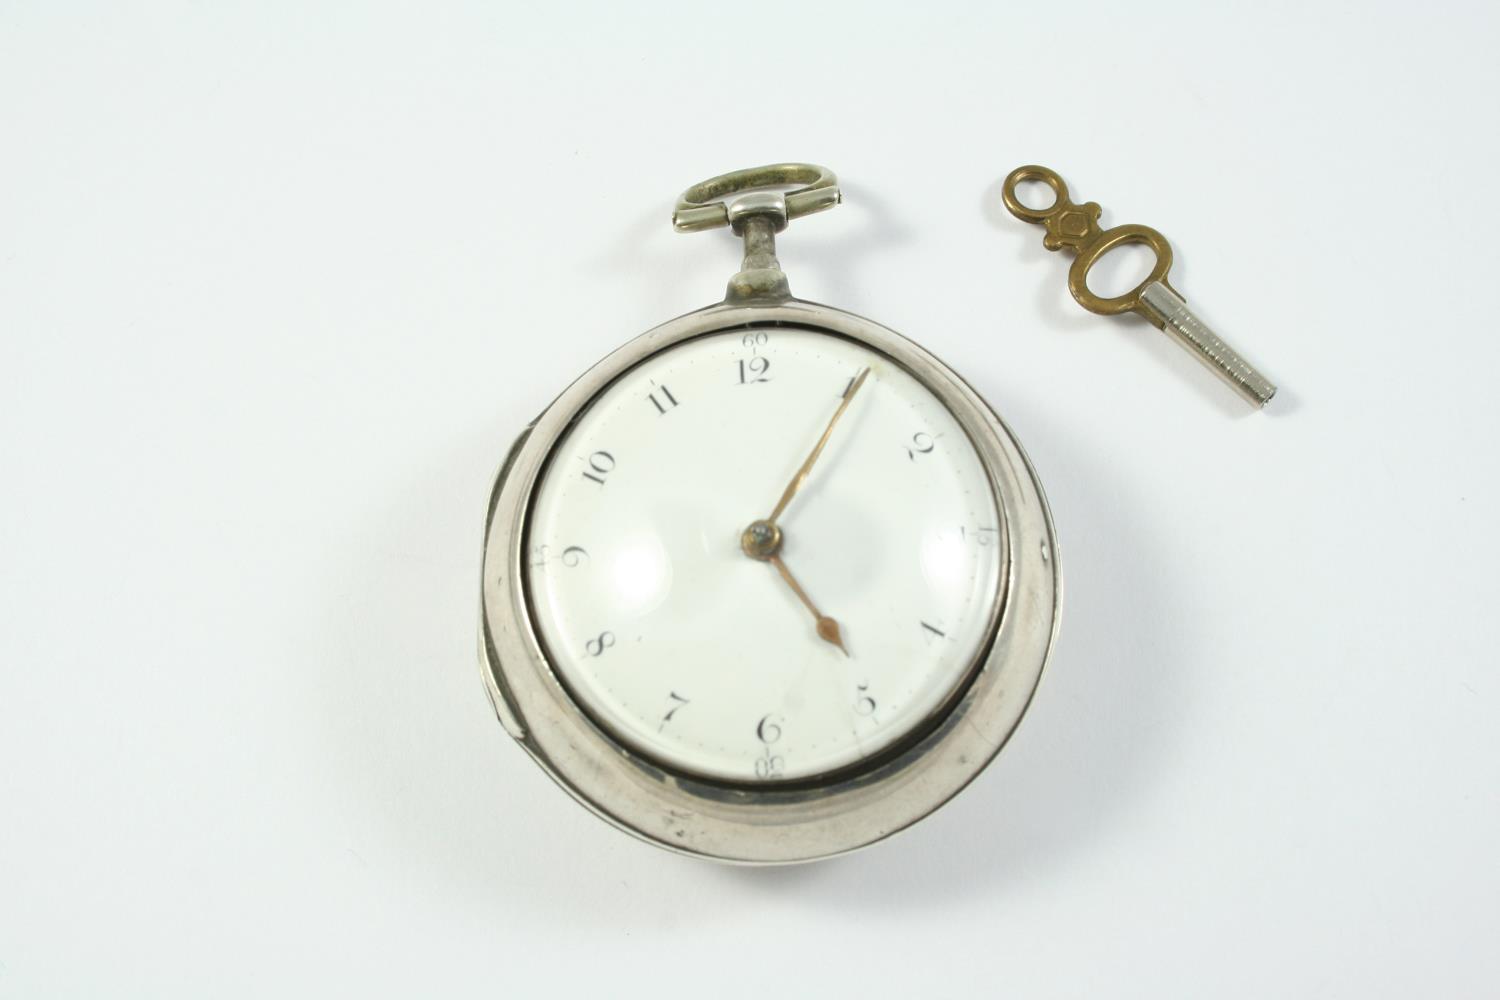 A SILVER PAIR CASE VERGE POCKET WATCH the white enamel dial with Arabic numerals, the movement